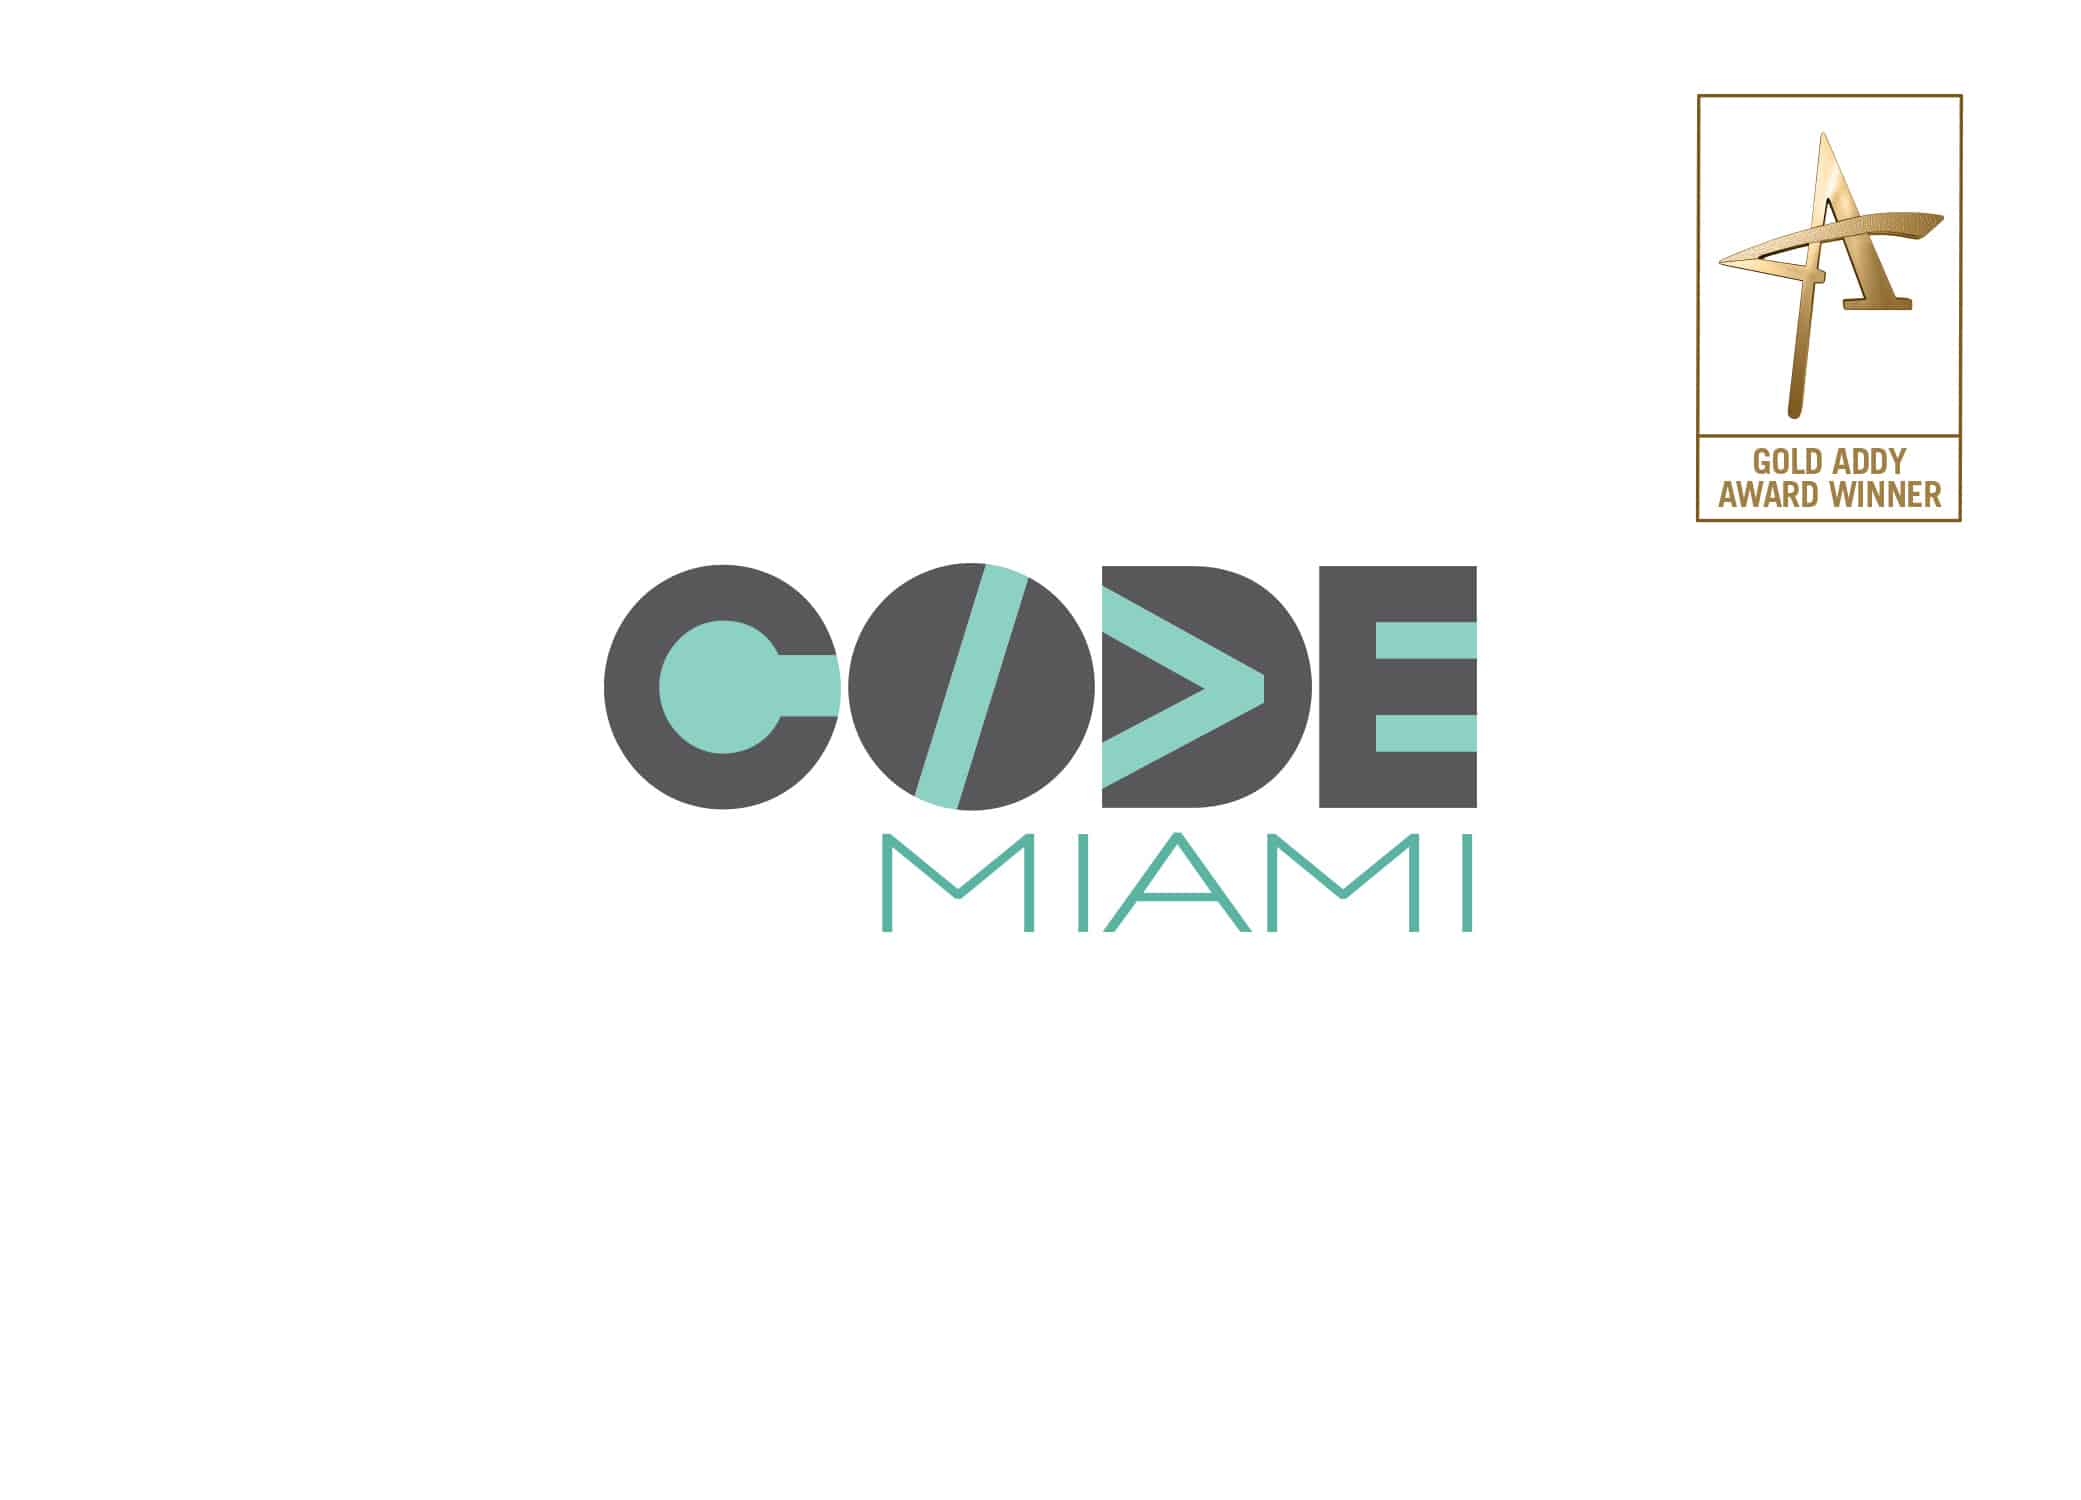 Code Miami logo graphic design using inspiration from computer code with mint green and grey color palette.